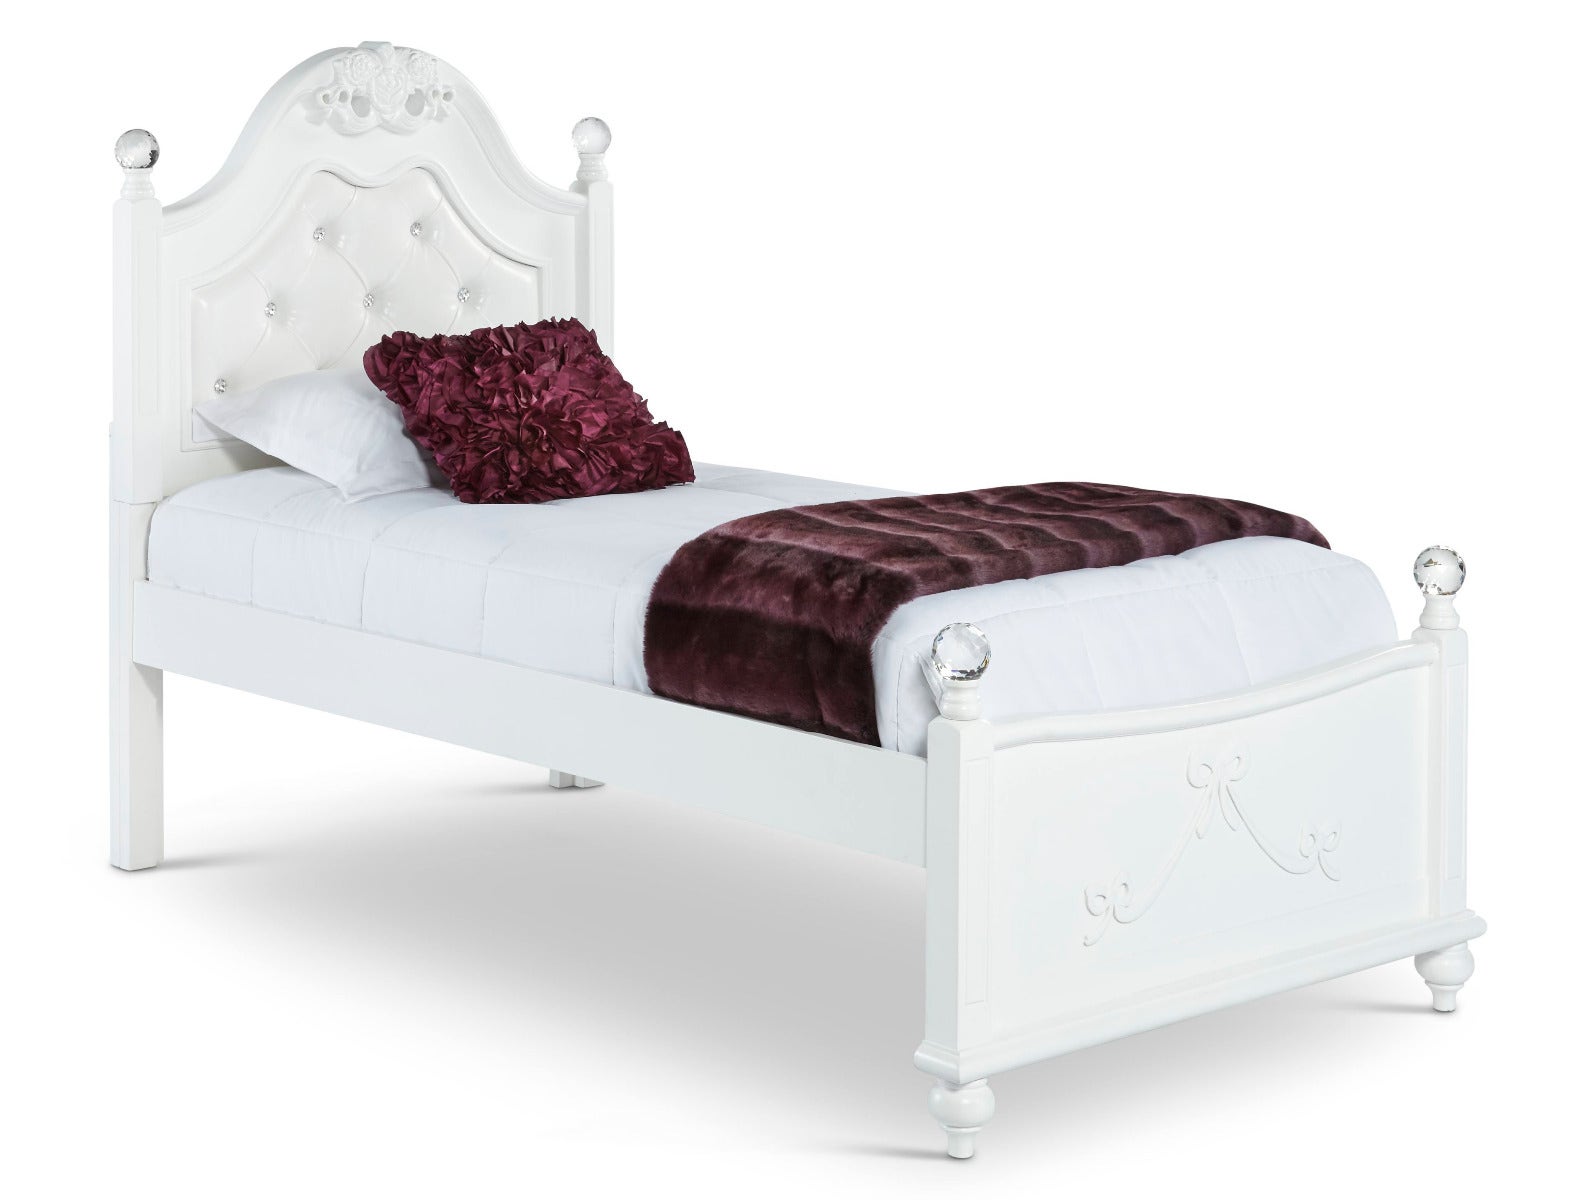 Alana Youth Bedroom Collection